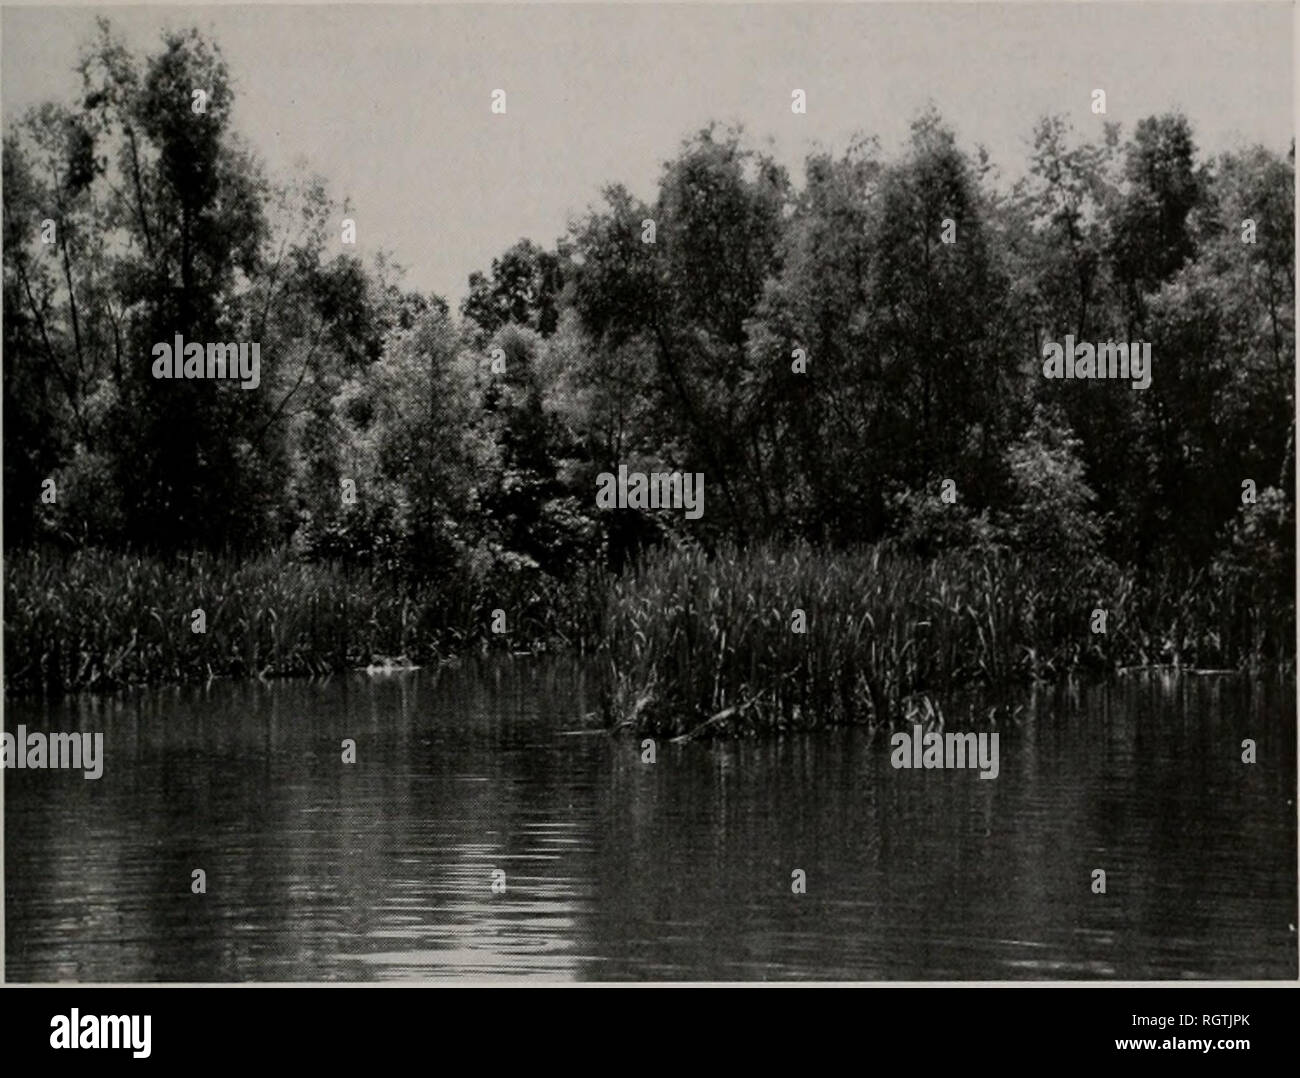 . Bulletin. Natural history; Natural history. Julv, 1966 Hansen: Stocking and Sport Fishing at Lake Glendale 109. Fig. 2.—Cattail and willow border at Lake Glendale. Much of the shoreline looked like this in the 1940's and early 1950's. low parts of the lake in 1954, was re- stricted to a few small patches in 1944. Several other plants, including arrow- head (Sagittaria sp.), sedge (Carex sp.), sweet flag (Aconis calamus Lin- naeus), and wild rice (Zizania aqiia- tica Linnaeus), were quite scattered, and stands were generally small. Wil- low trees, Salix sp., grew close to the water's edge alo Stock Photo